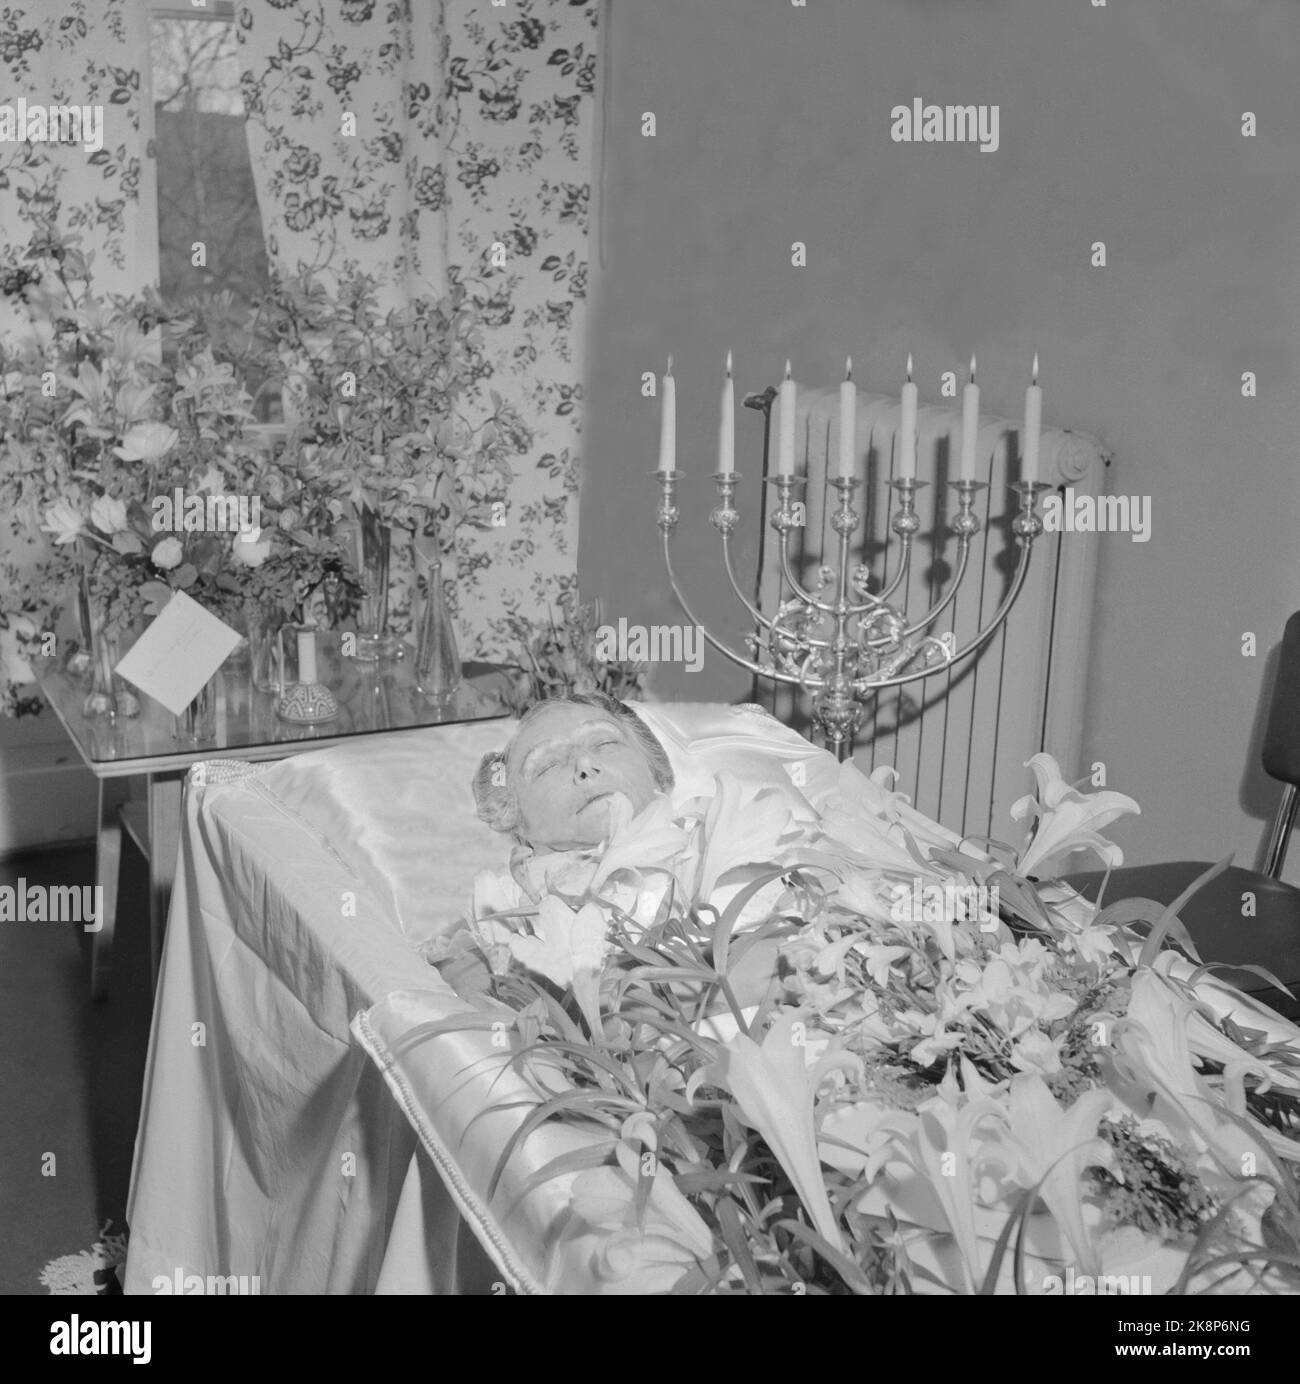 Oslo 195405 Crown Princess Märtha's death. The Crown Princess's death mask at Rikshospitalet. 7-armed candlestick by the headboard. Lilies on the bed. Photo: NTB / NTB Stock Photo